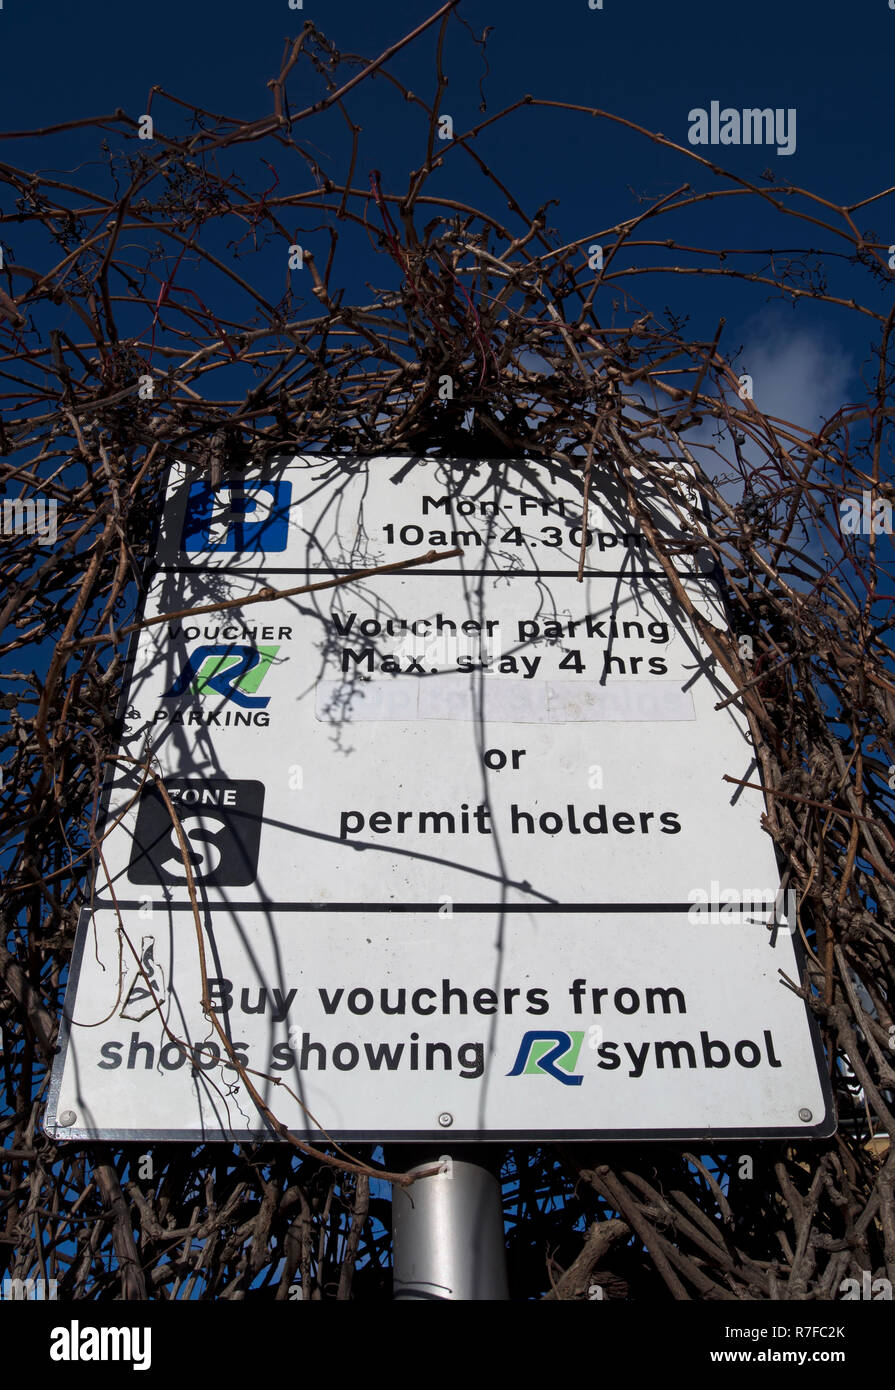 road sign giving details of car parking restrictions partially obscured by tree branches, in the borough of richmond upon thames, london, england Stock Photo